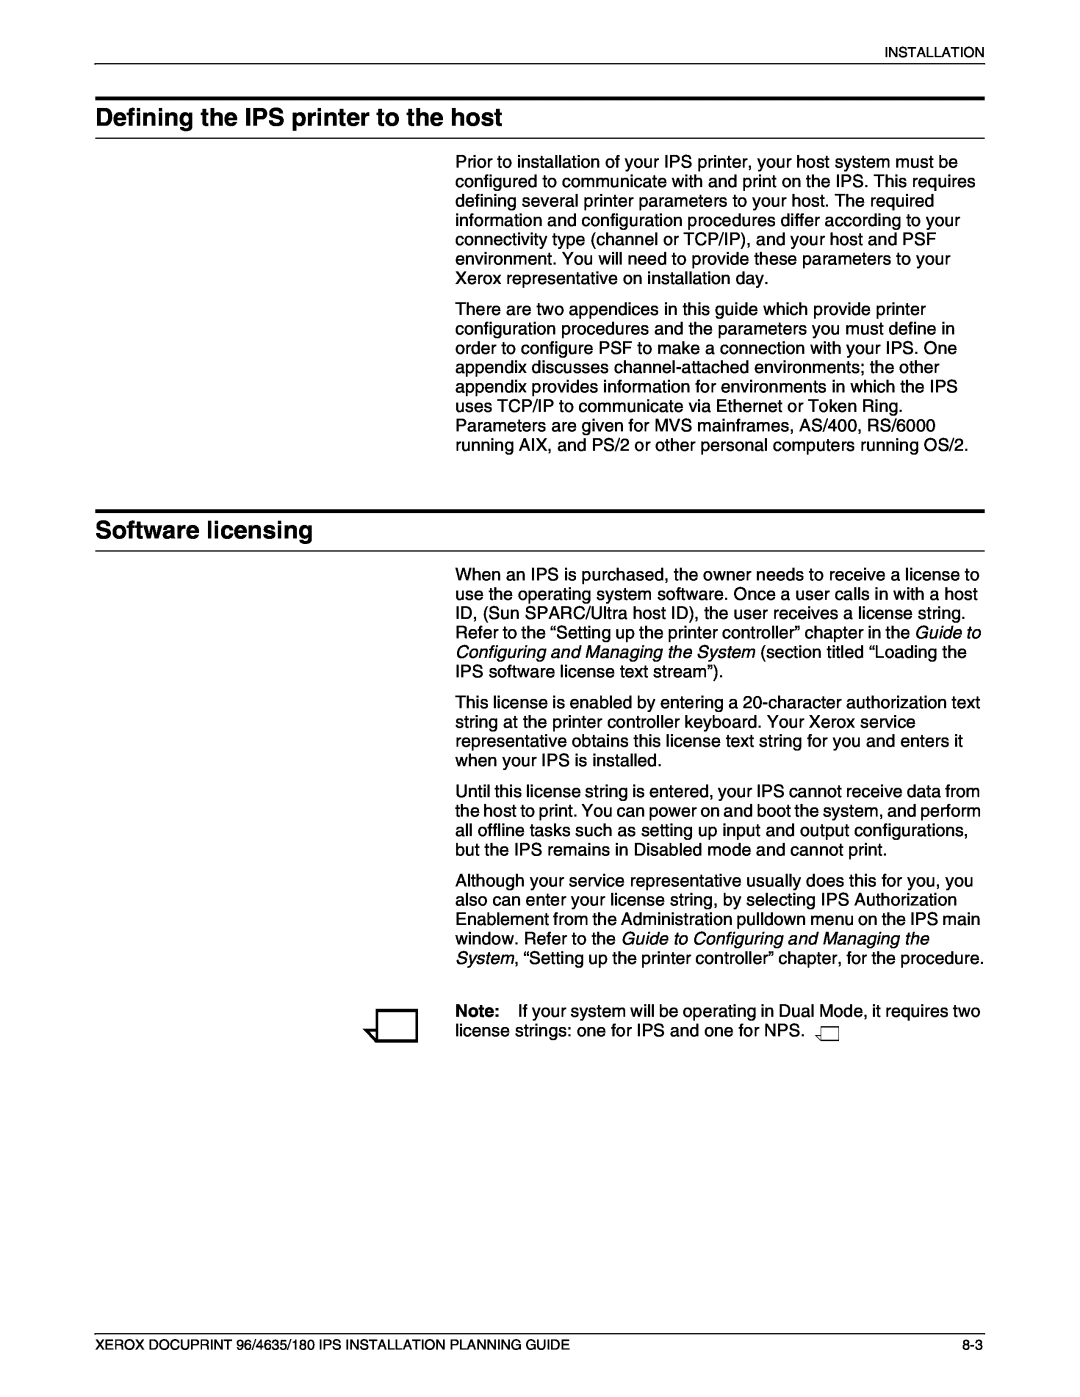 Xerox 180 IPS manual Defining the IPS printer to the host, Software licensing 